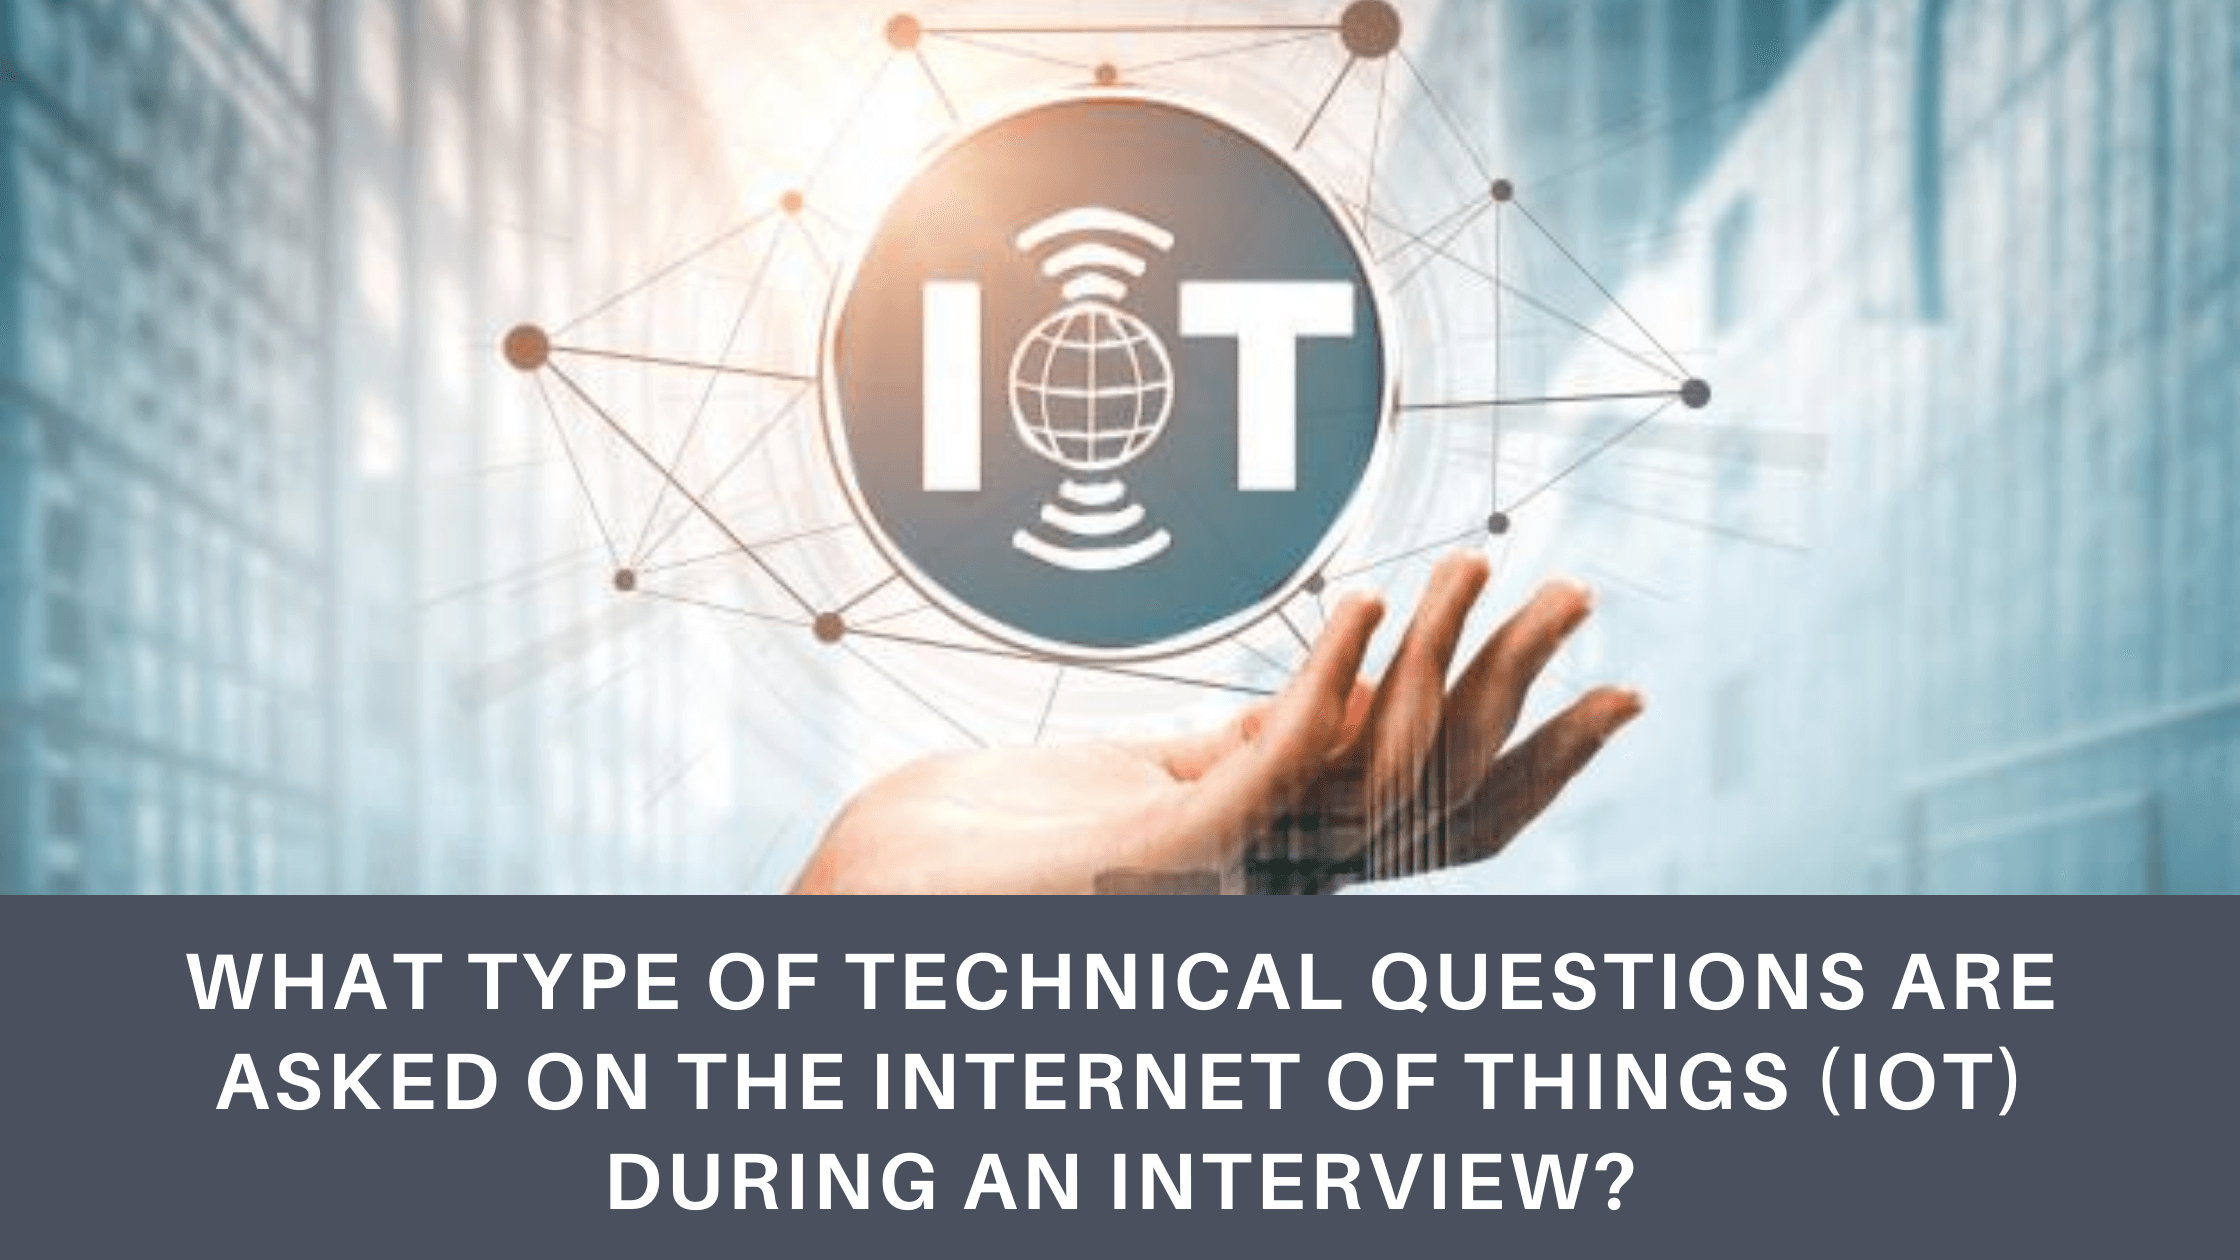 Internet of Things (IoT) during an interview